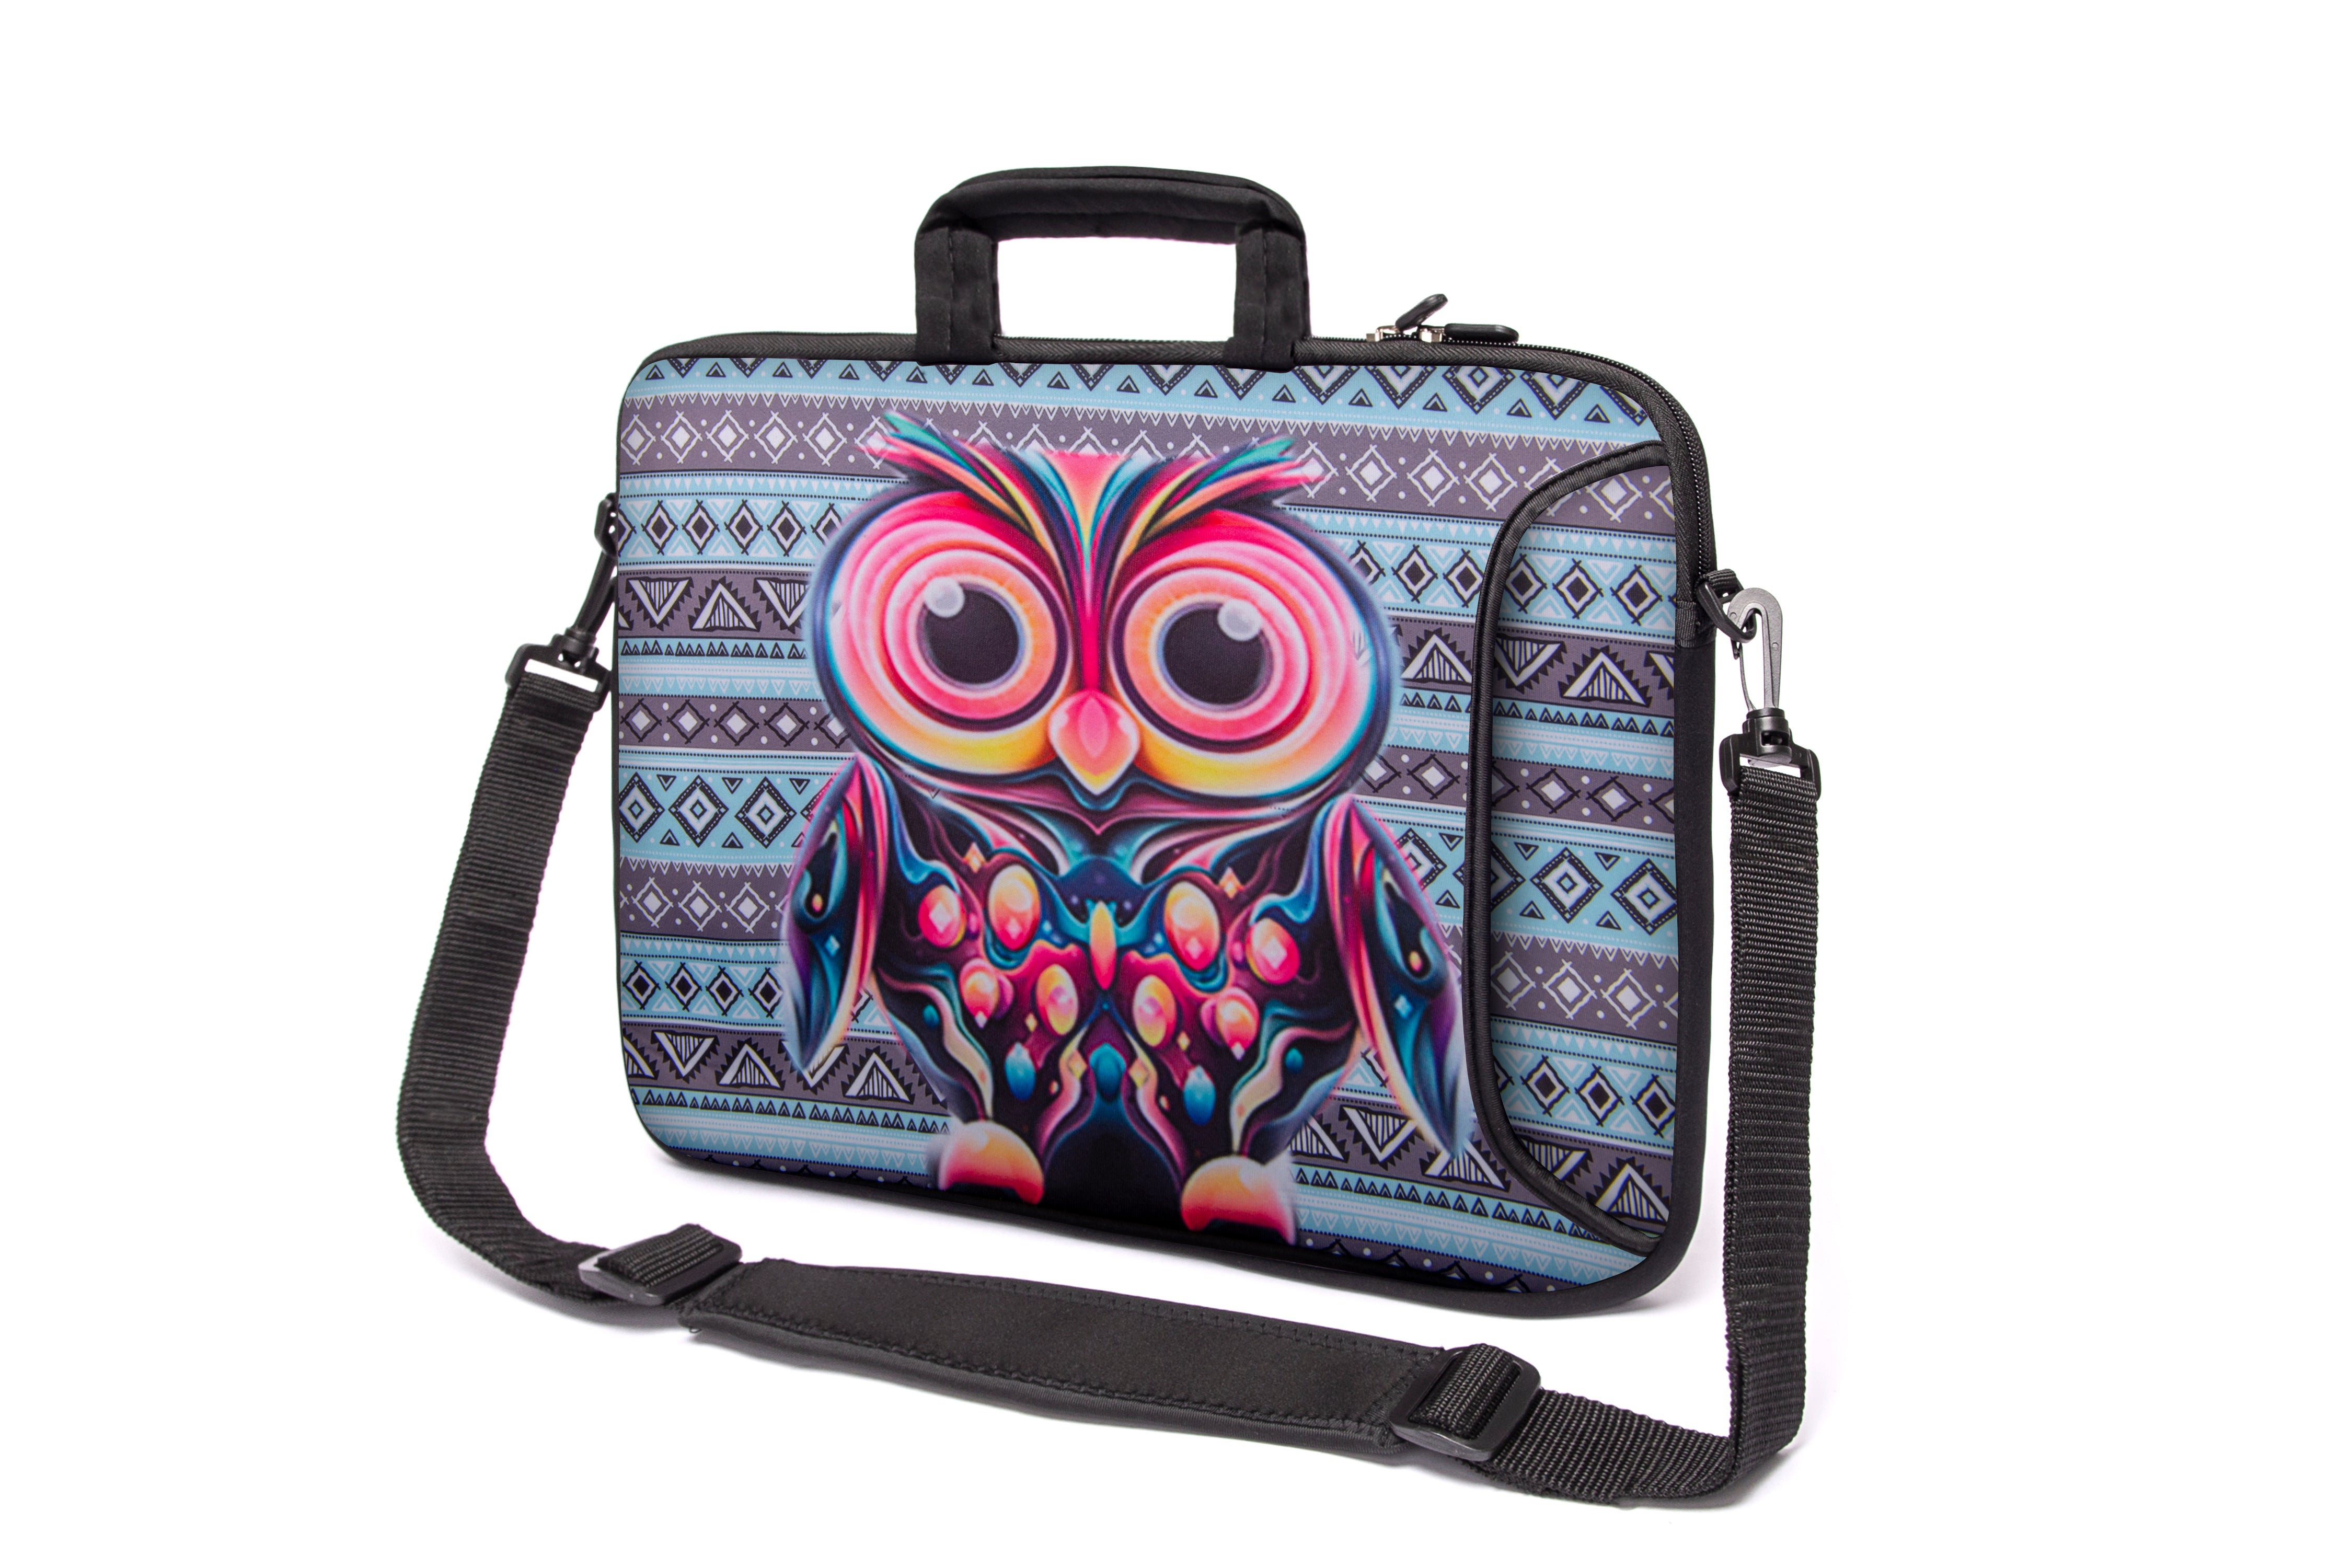 17"- 17.3" (inch) LAPTOP BAG/CASE WITH HANDLE & STRAP, NEOPRENE MADE FOR LAPTOPS/NOTEBOOKS, ZIPPED*OWL*